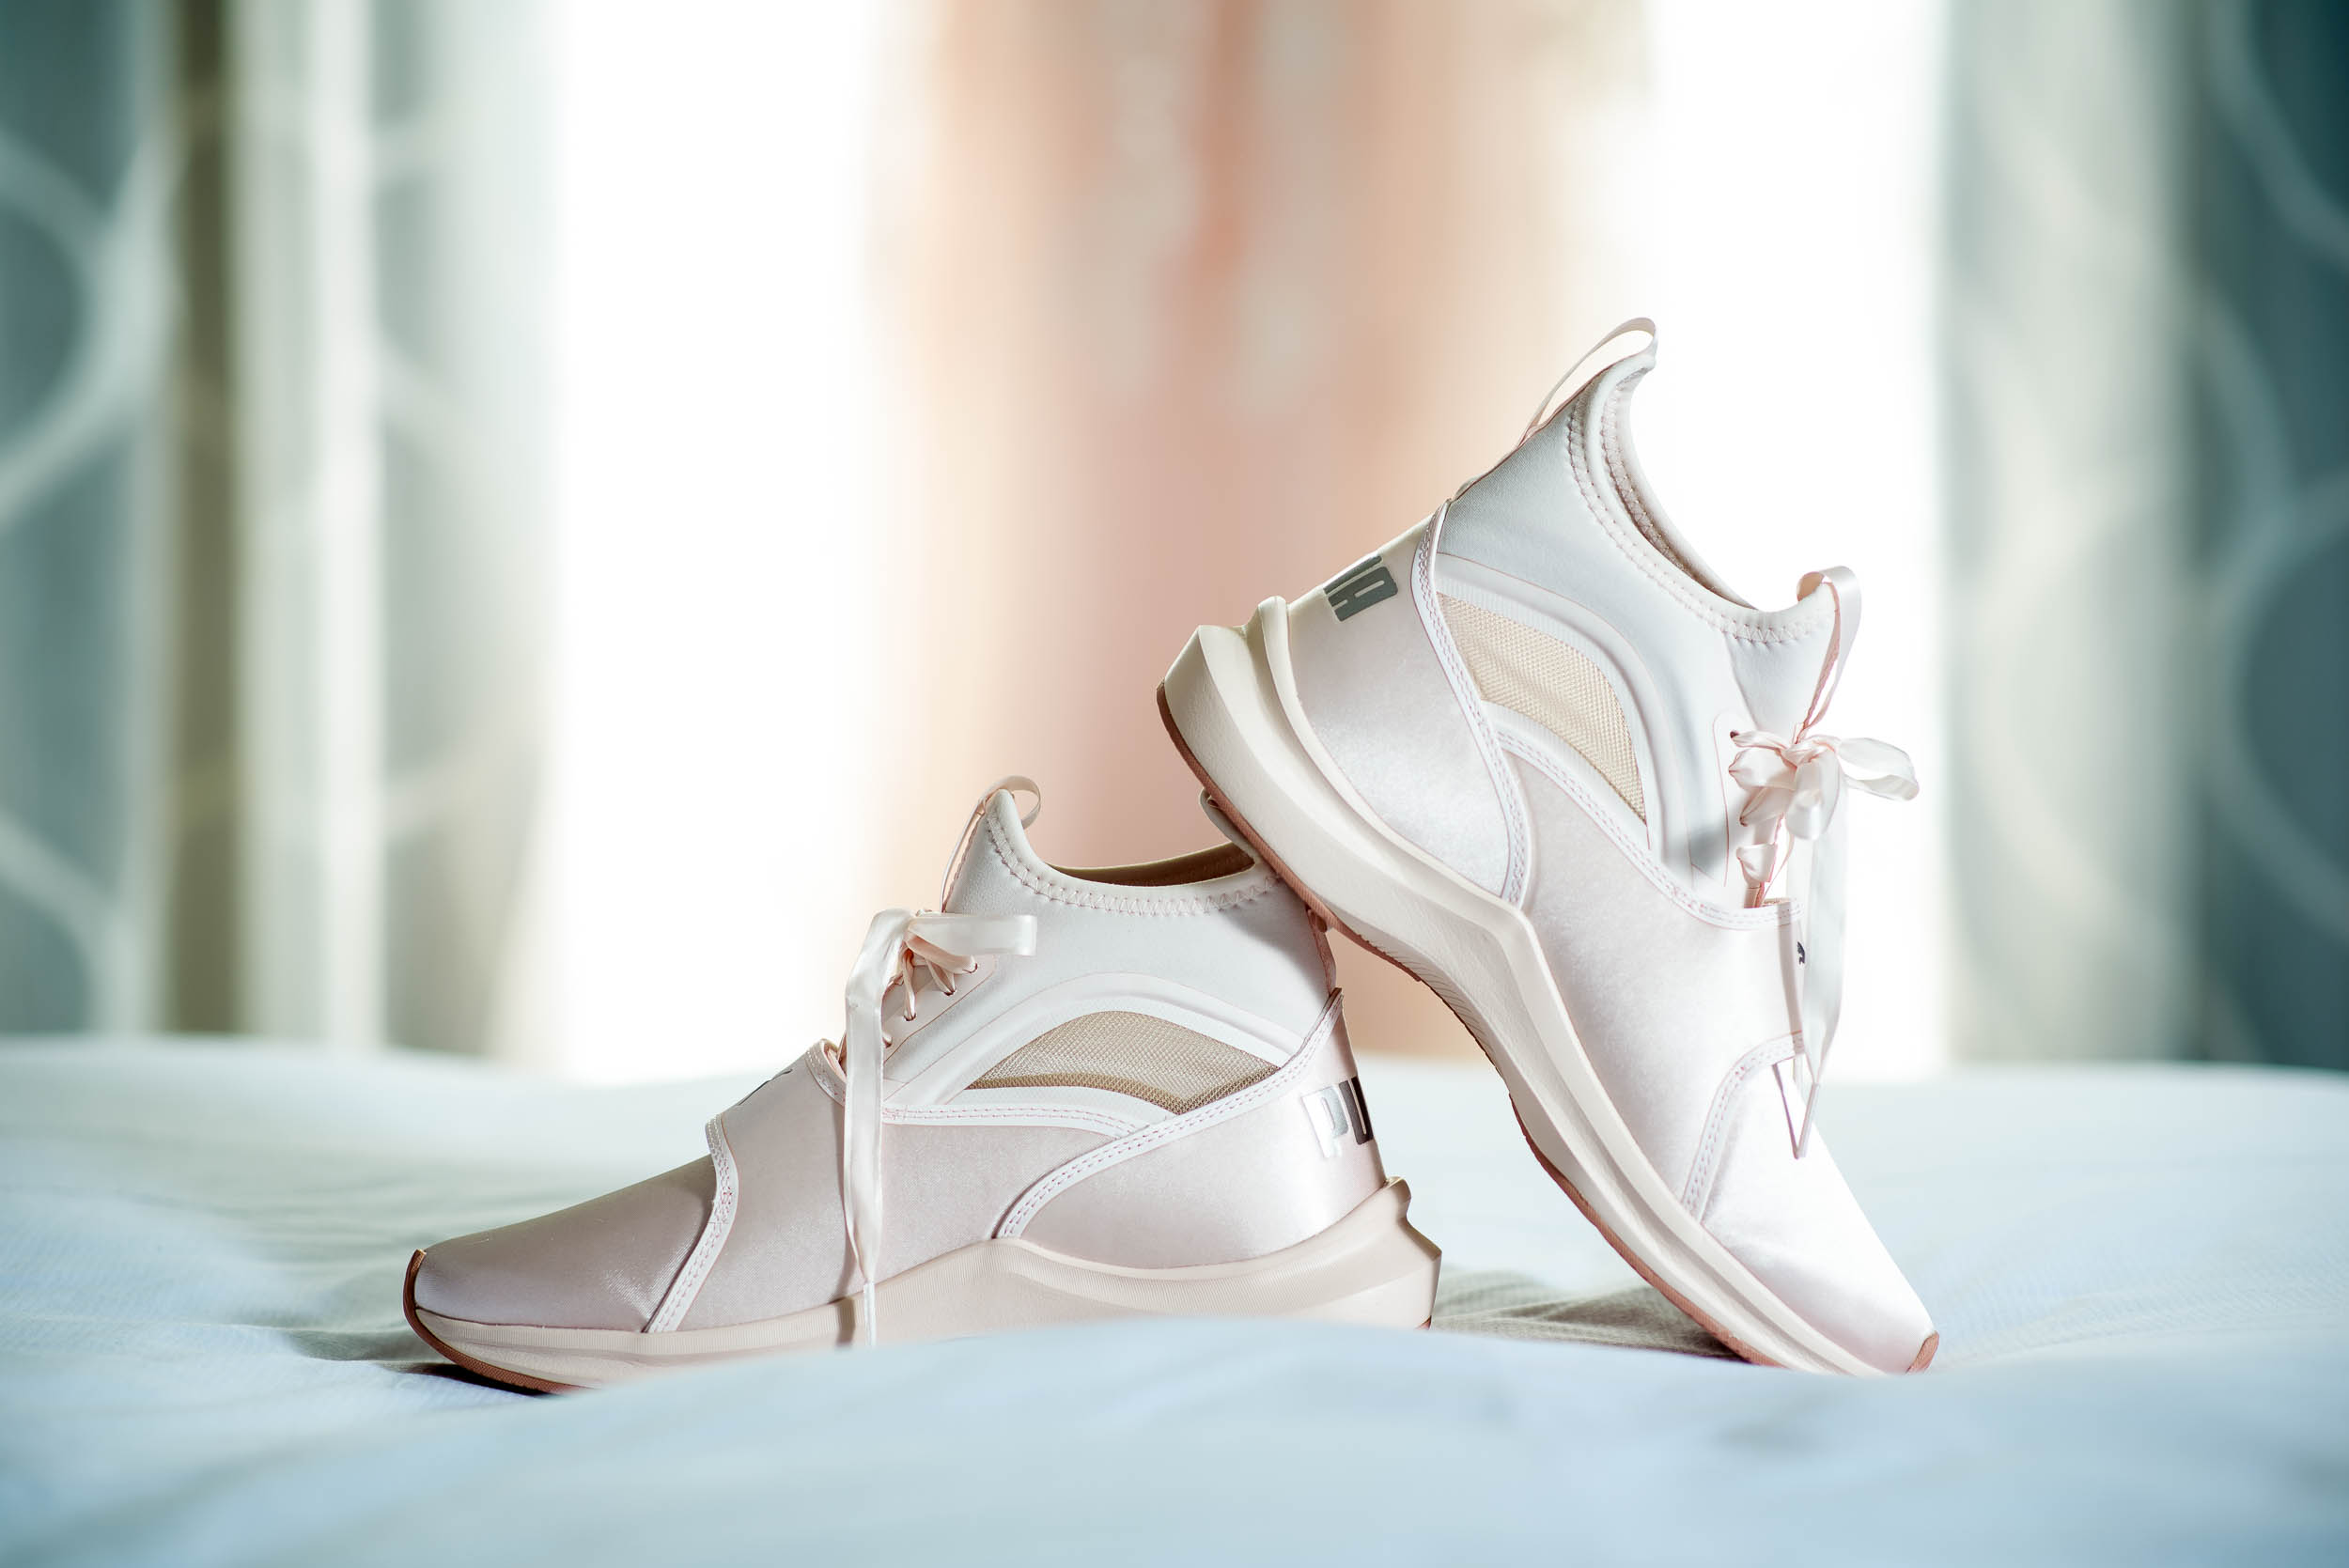 Bride's Puma wedding day shoes during an Independence Grove Chicago wedding.  